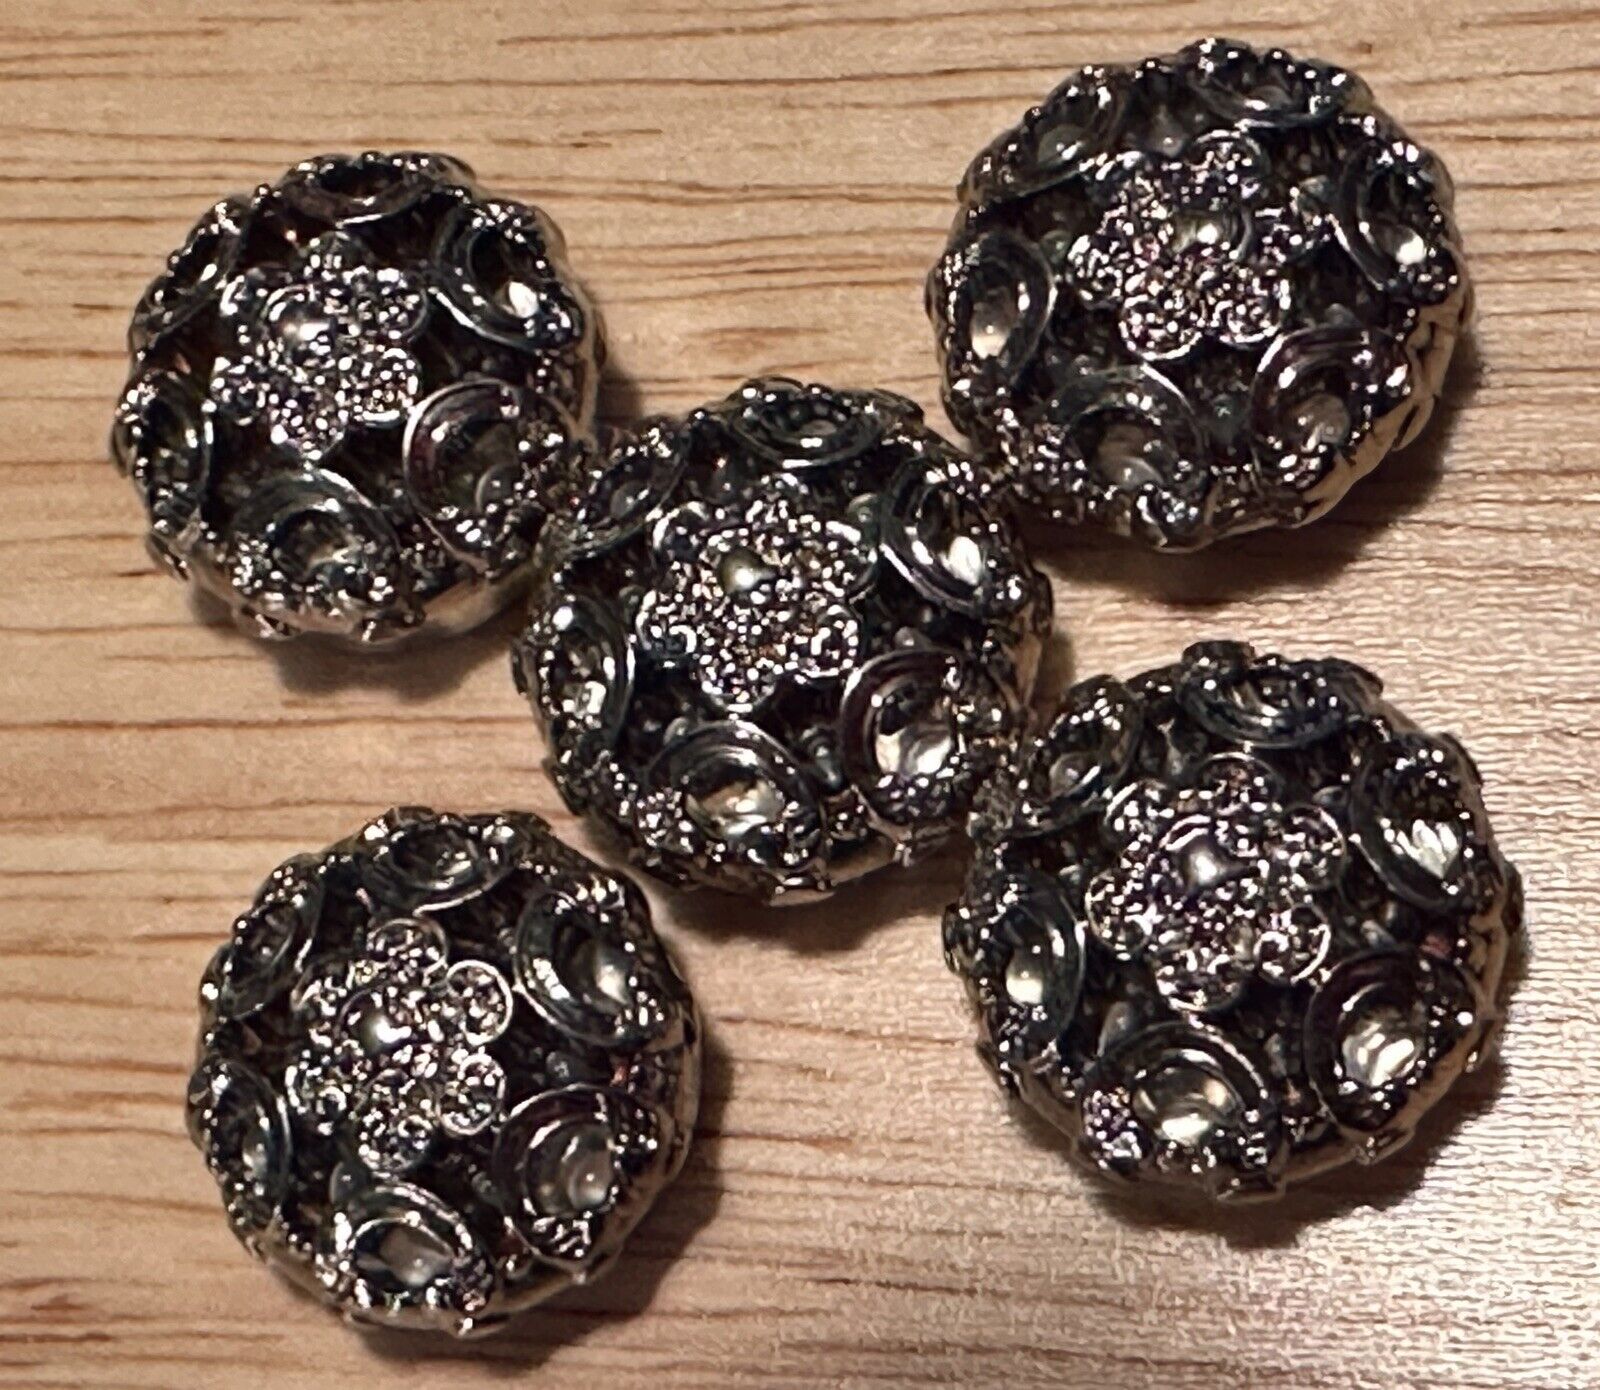 Lot of 5 of  Silver Tone Filigree Floral Ornate Artsy Boho Metal Button Covers